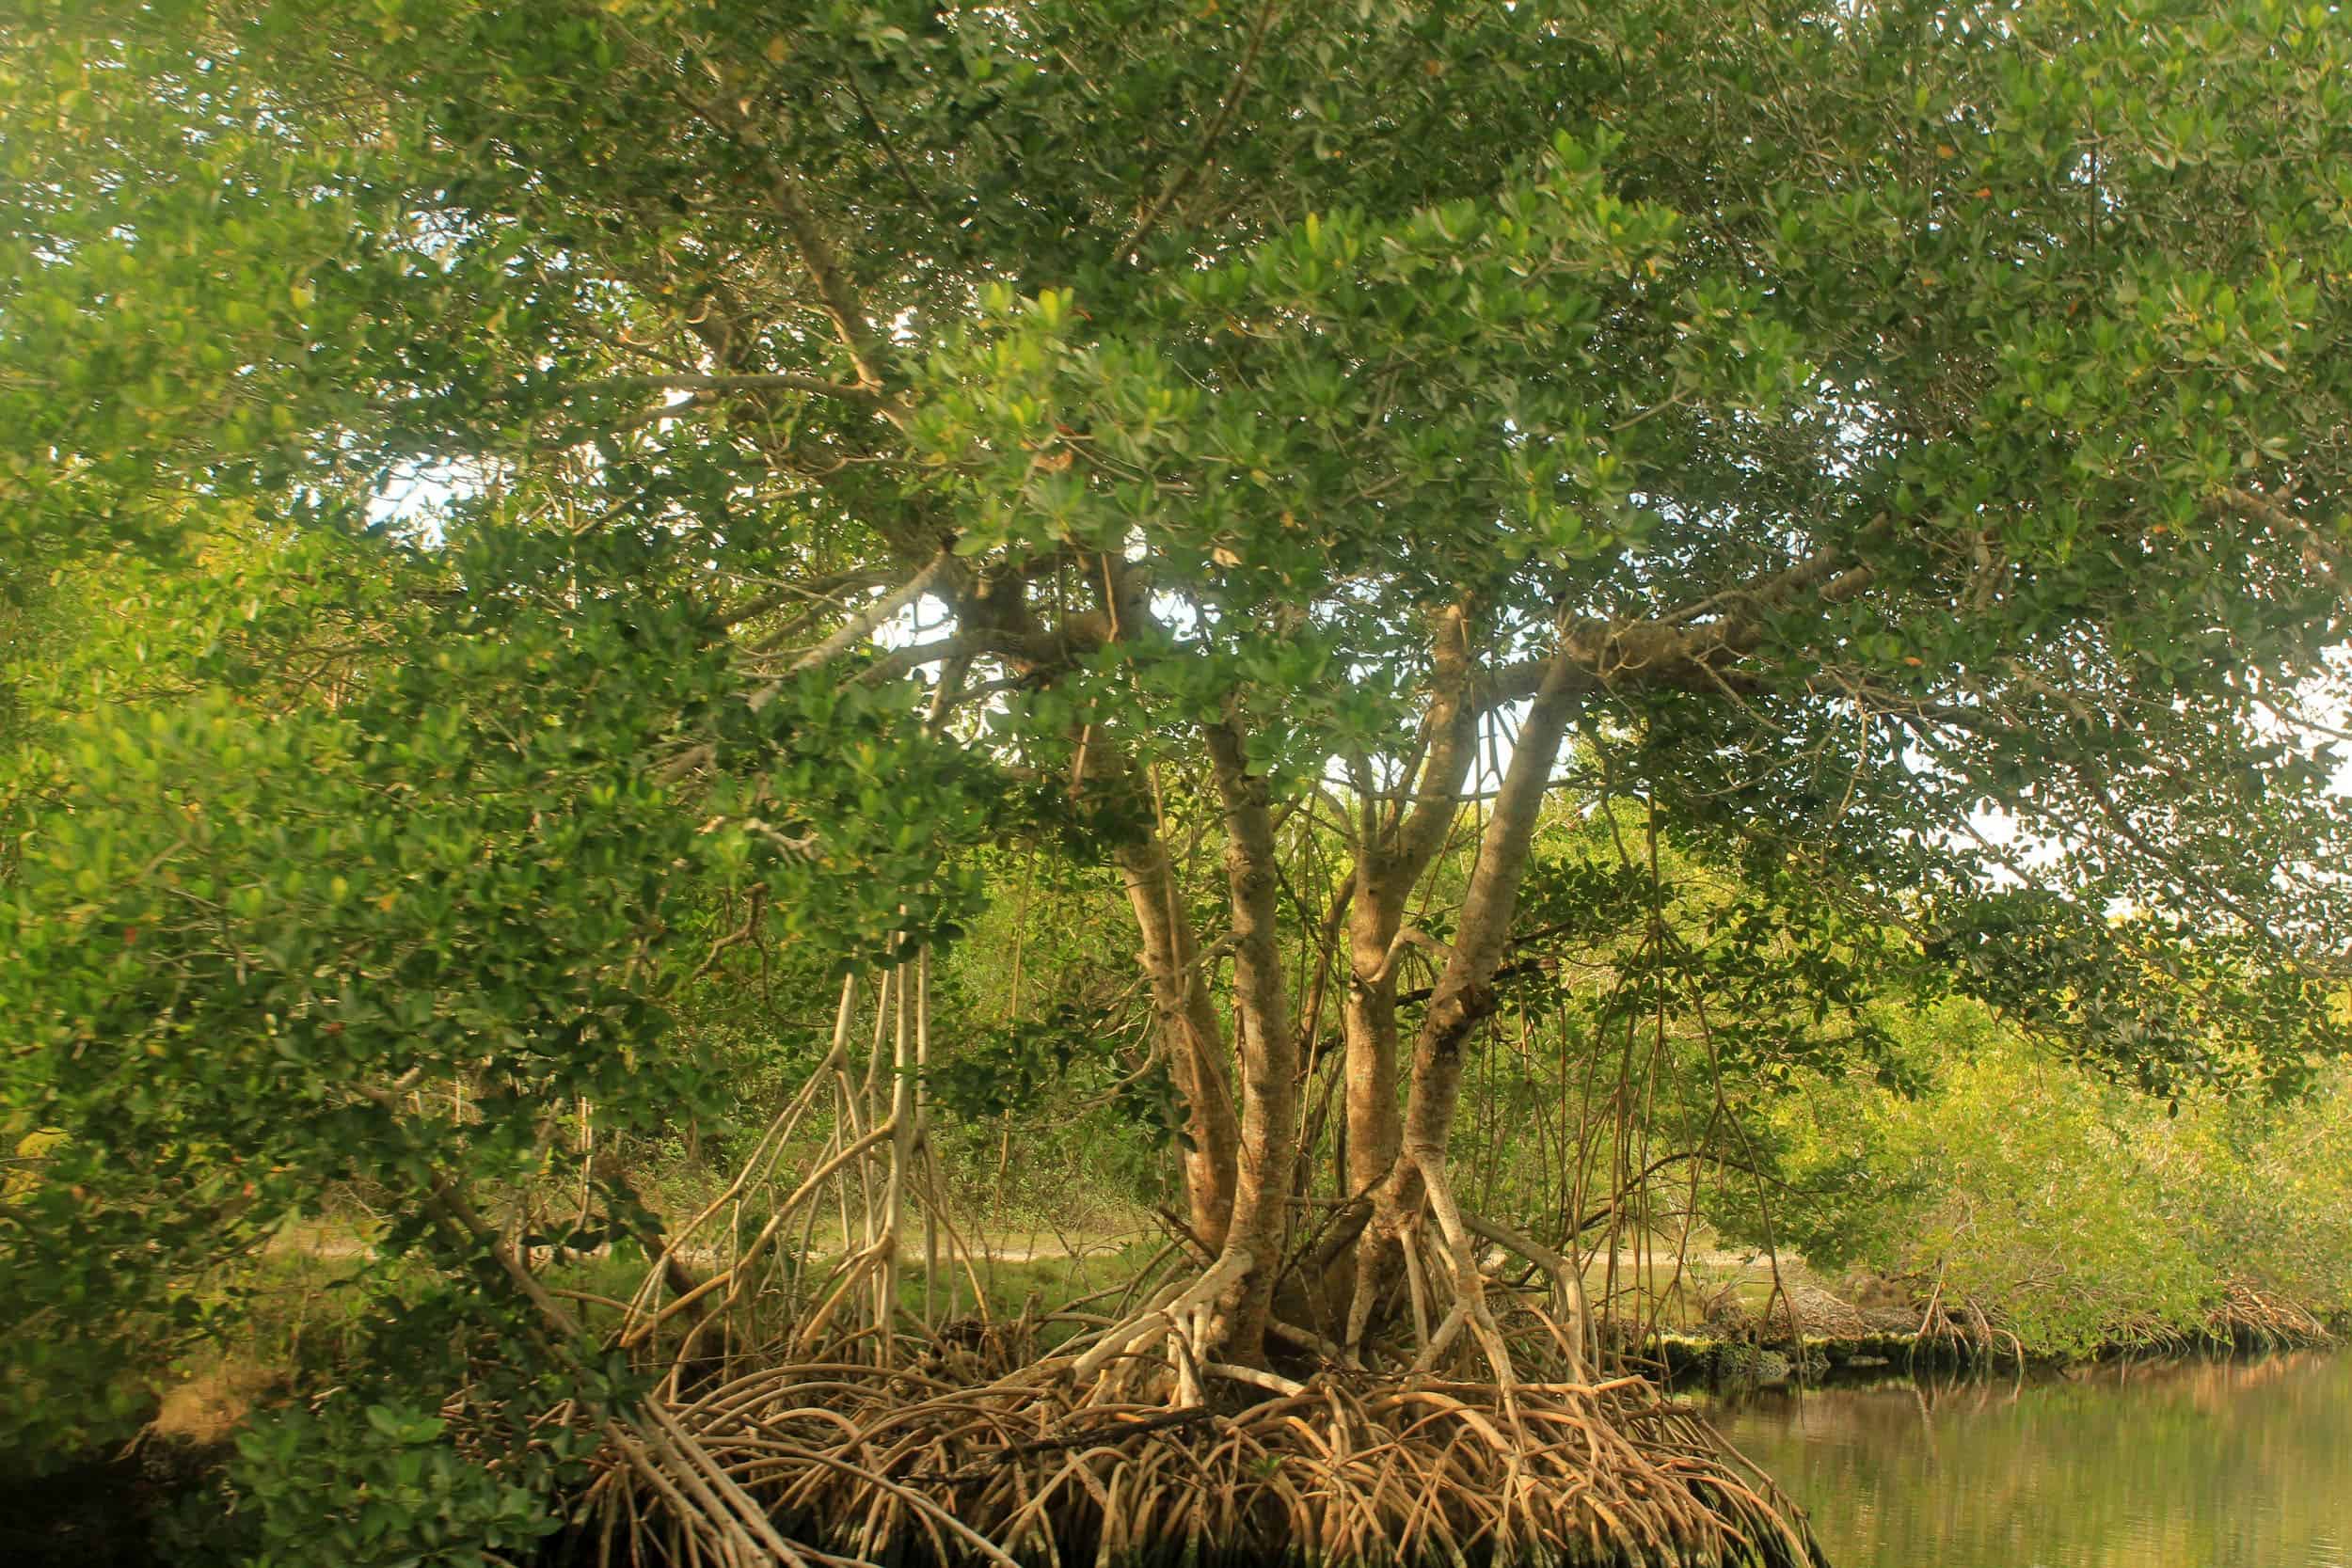 A mangrove tree in the Philippines. Image credits: Yinan Chen.